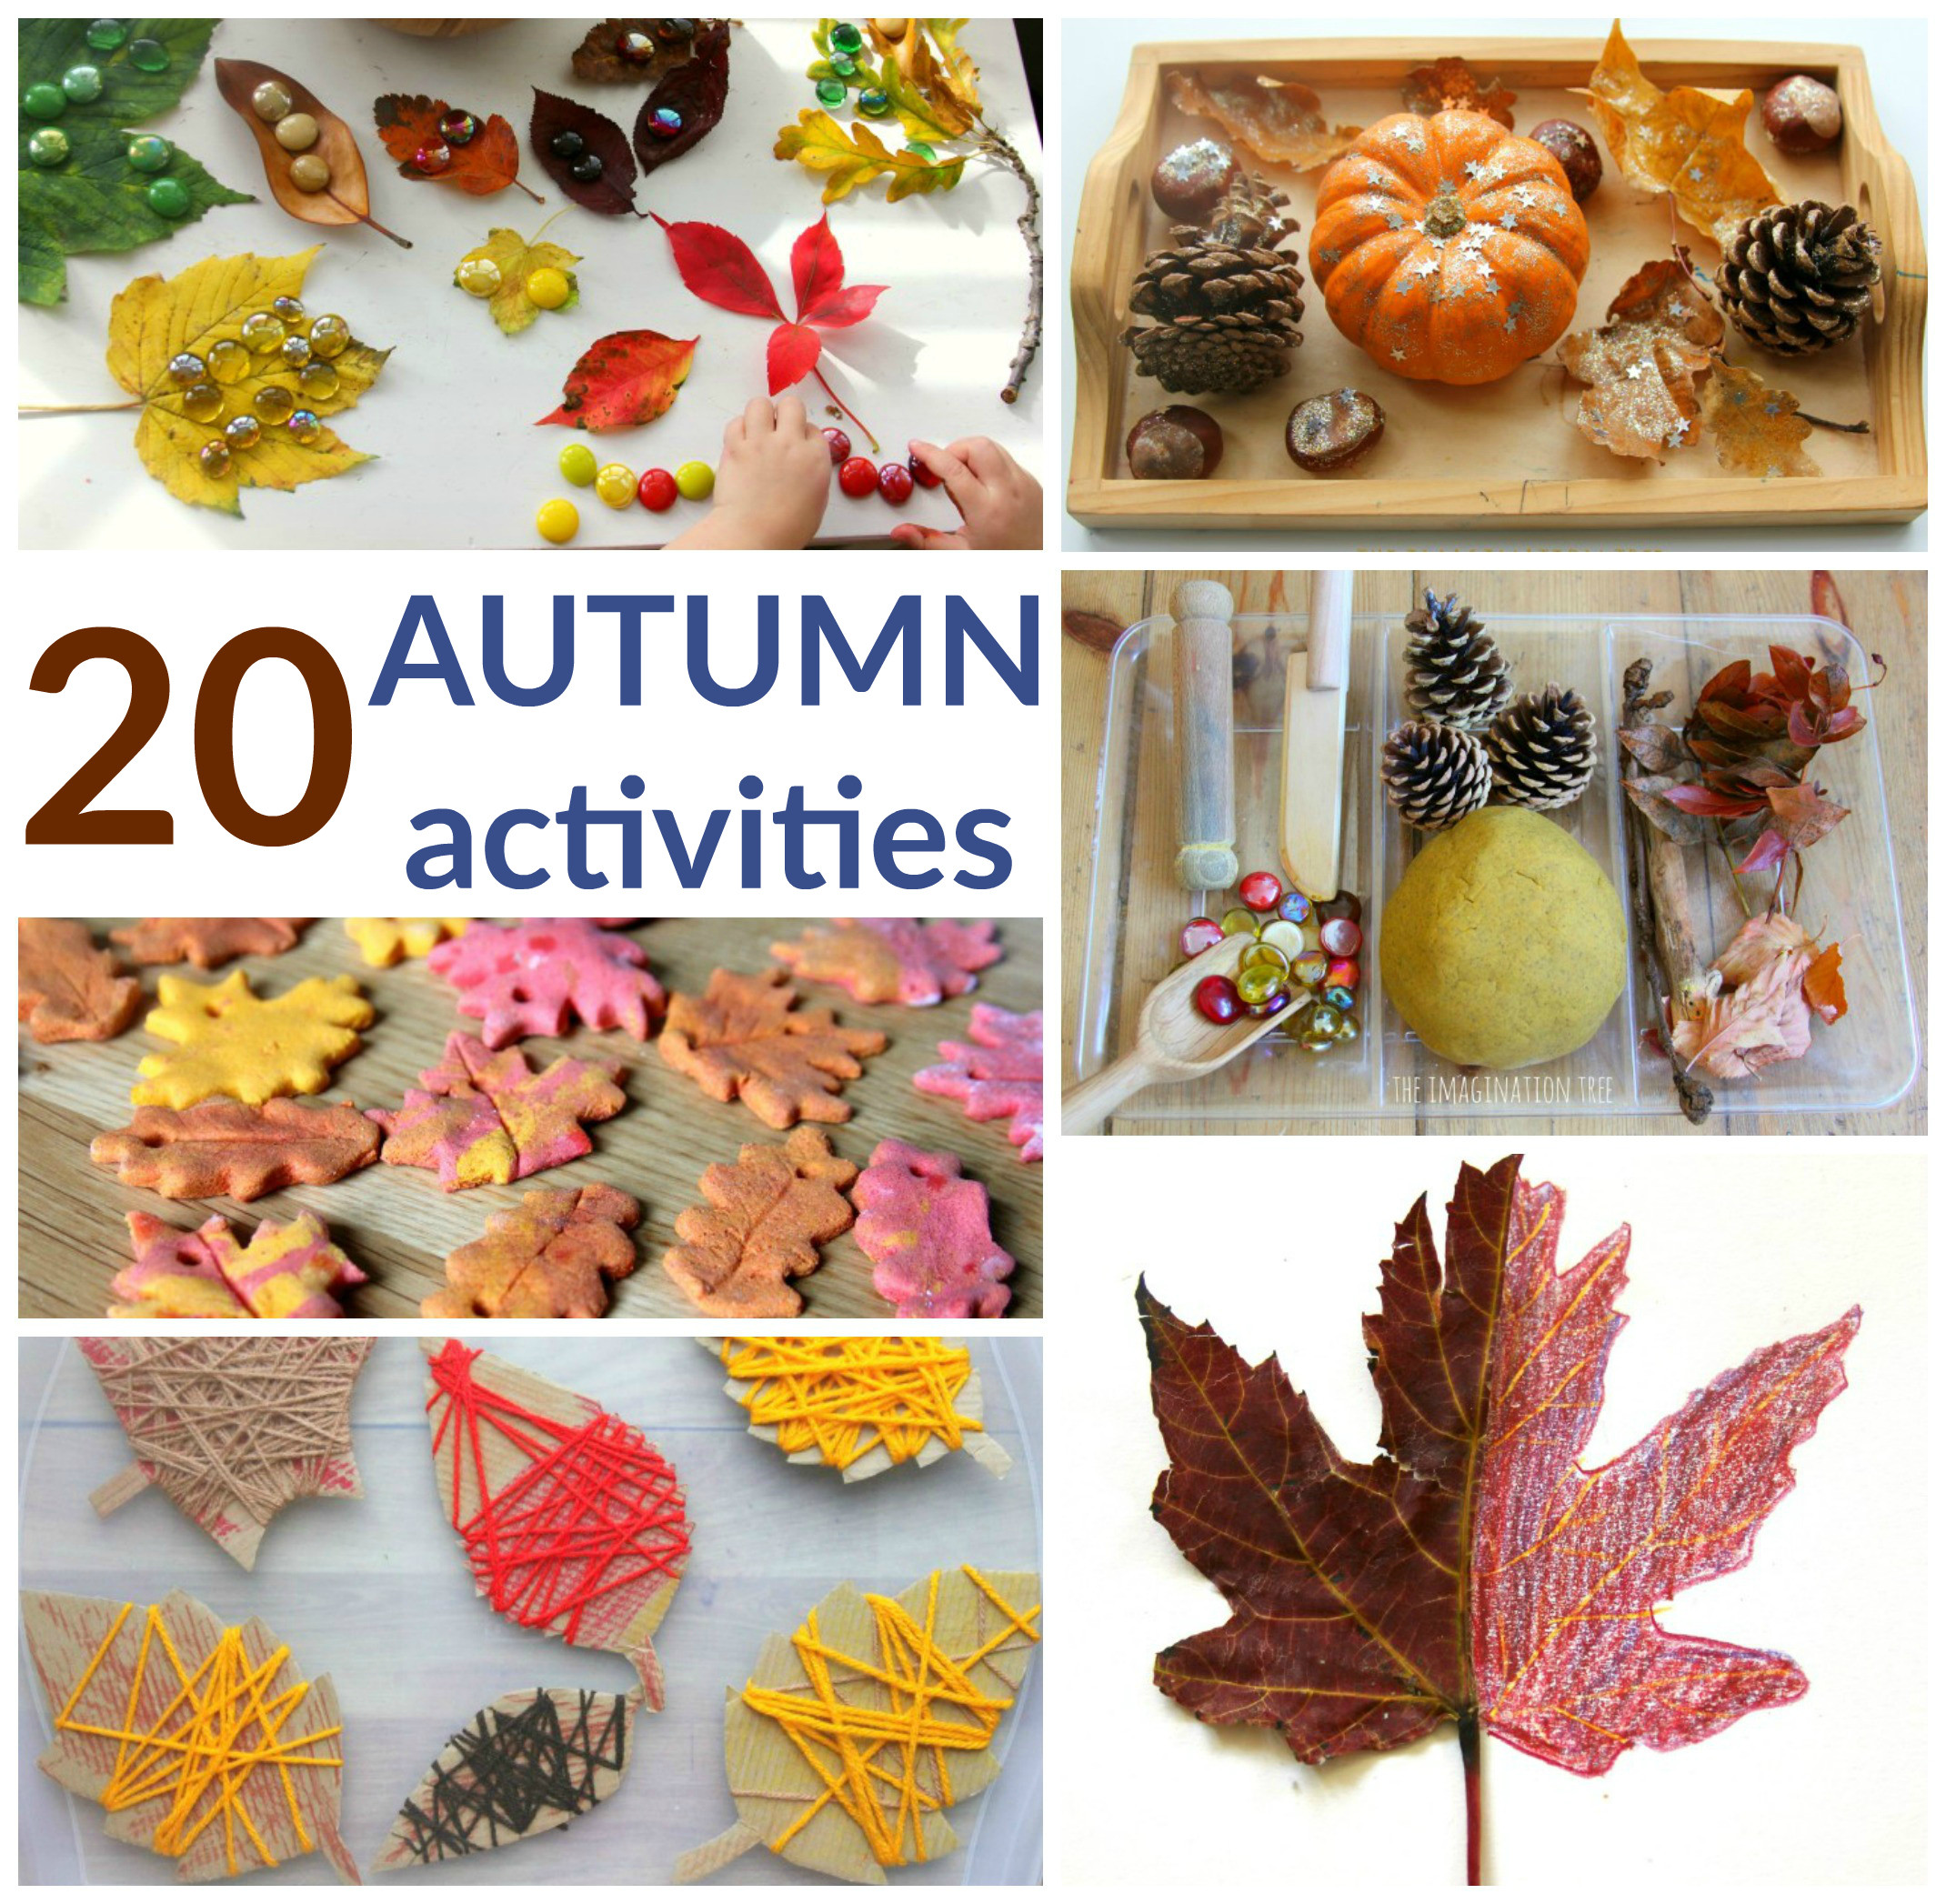 Autumn Activities For Toddlers
 The Best Autumn Activities for Kids The Imagination Tree